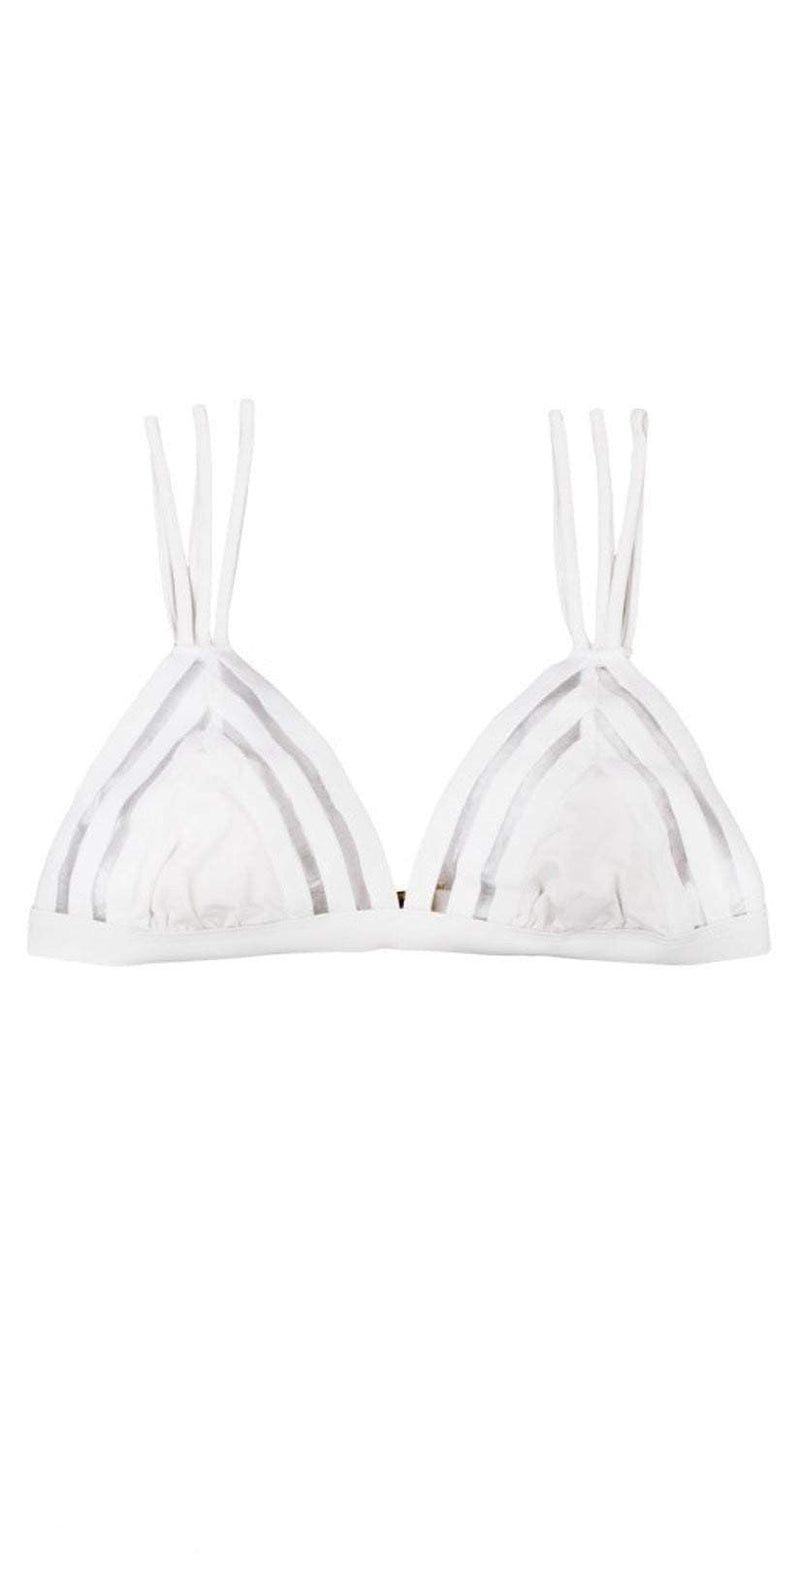 Beach Bunny Sheer Addiction Triangle Top In White B16125T1-WHT: